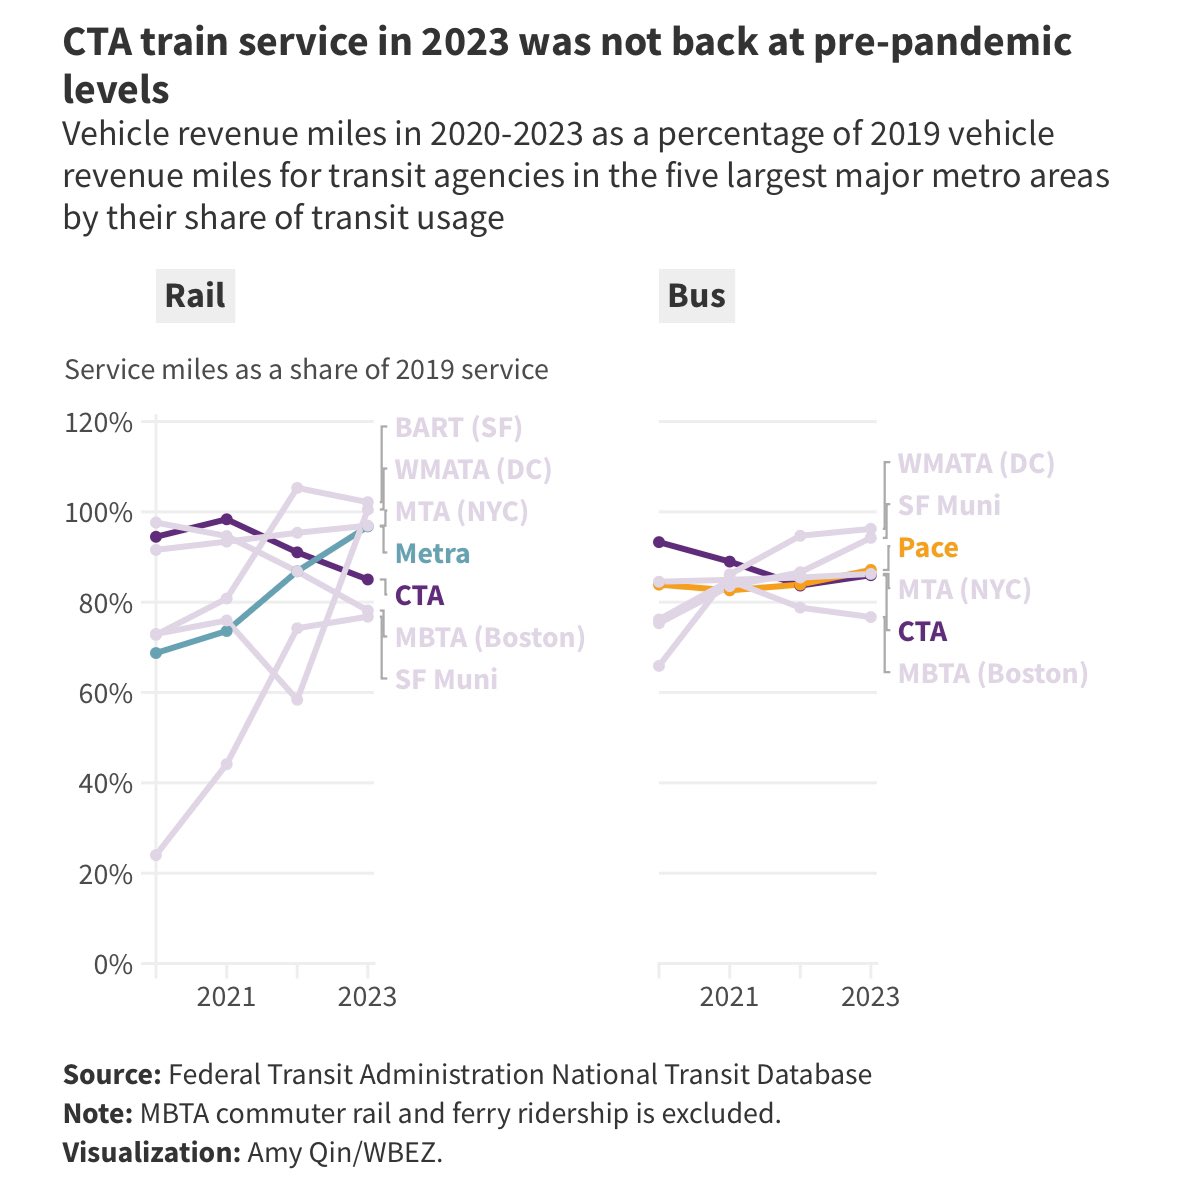 CTA is one of very few major transit agencies that continues to cut rail service. Leadership had 3 years to fix this by hiring more rail operators. Time is up, we need leaders who know how to run rail transit.